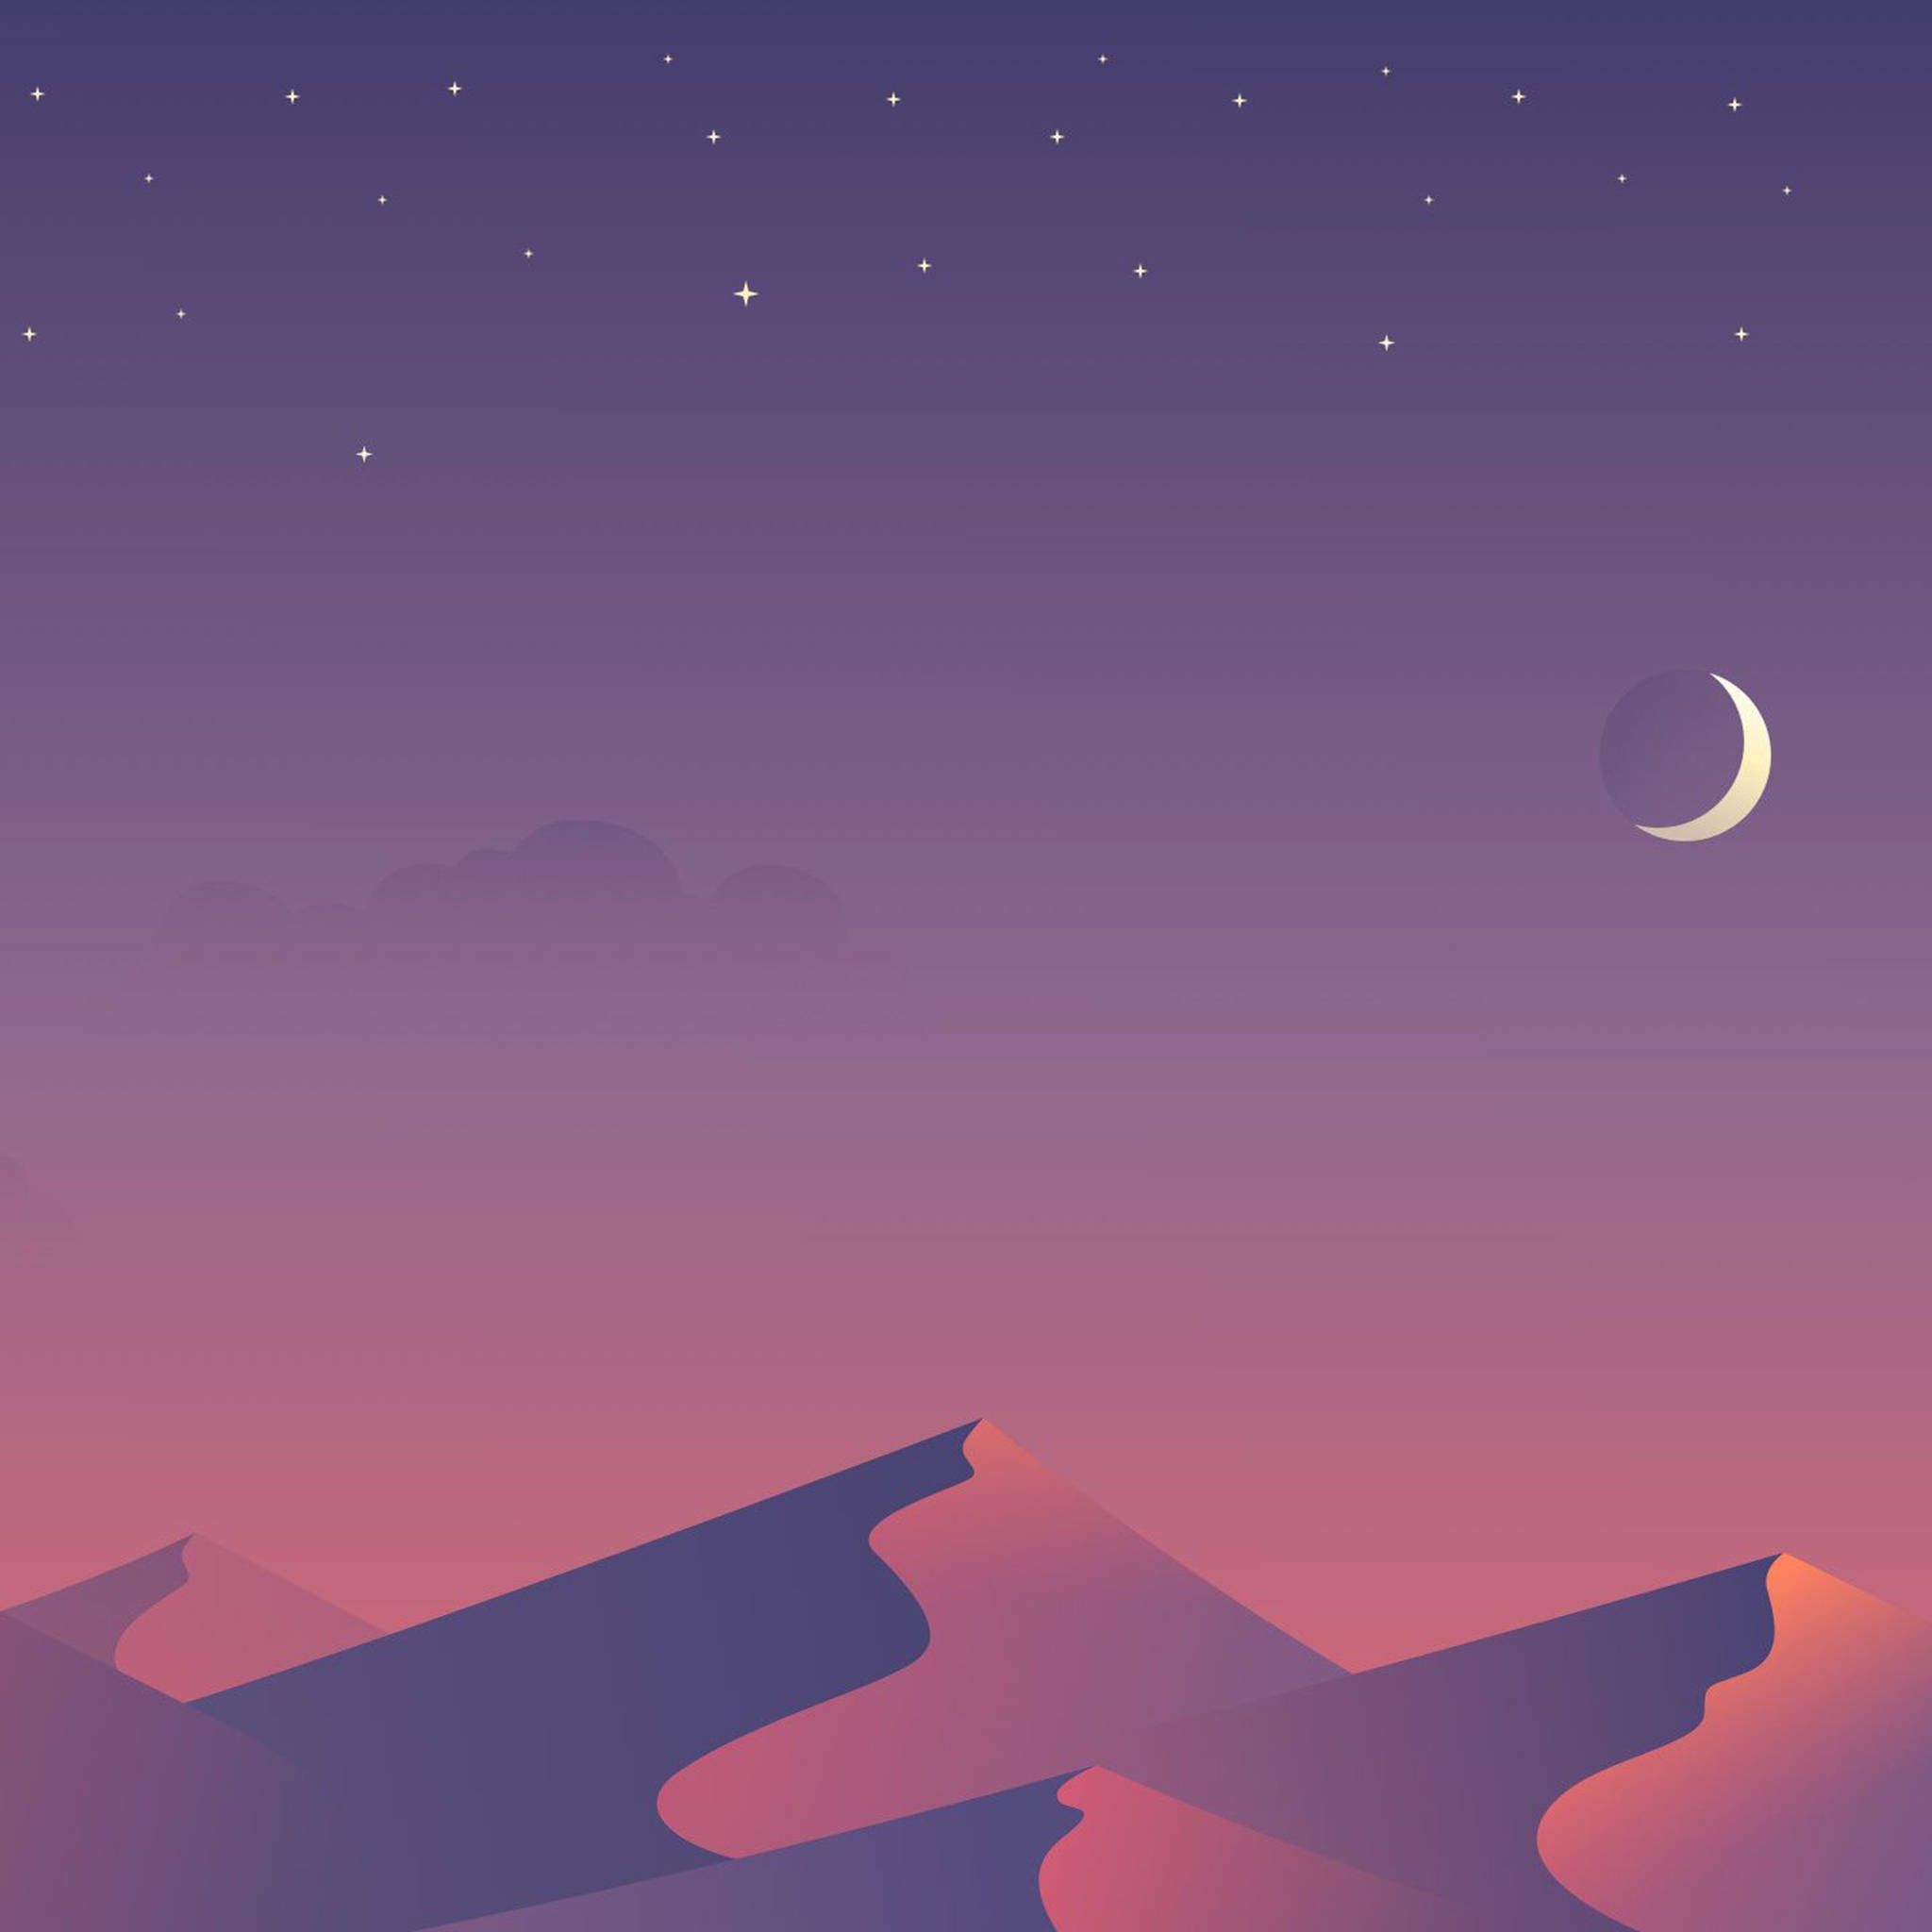 A desert landscape at night with a crescent moon and stars in the sky. - Desert